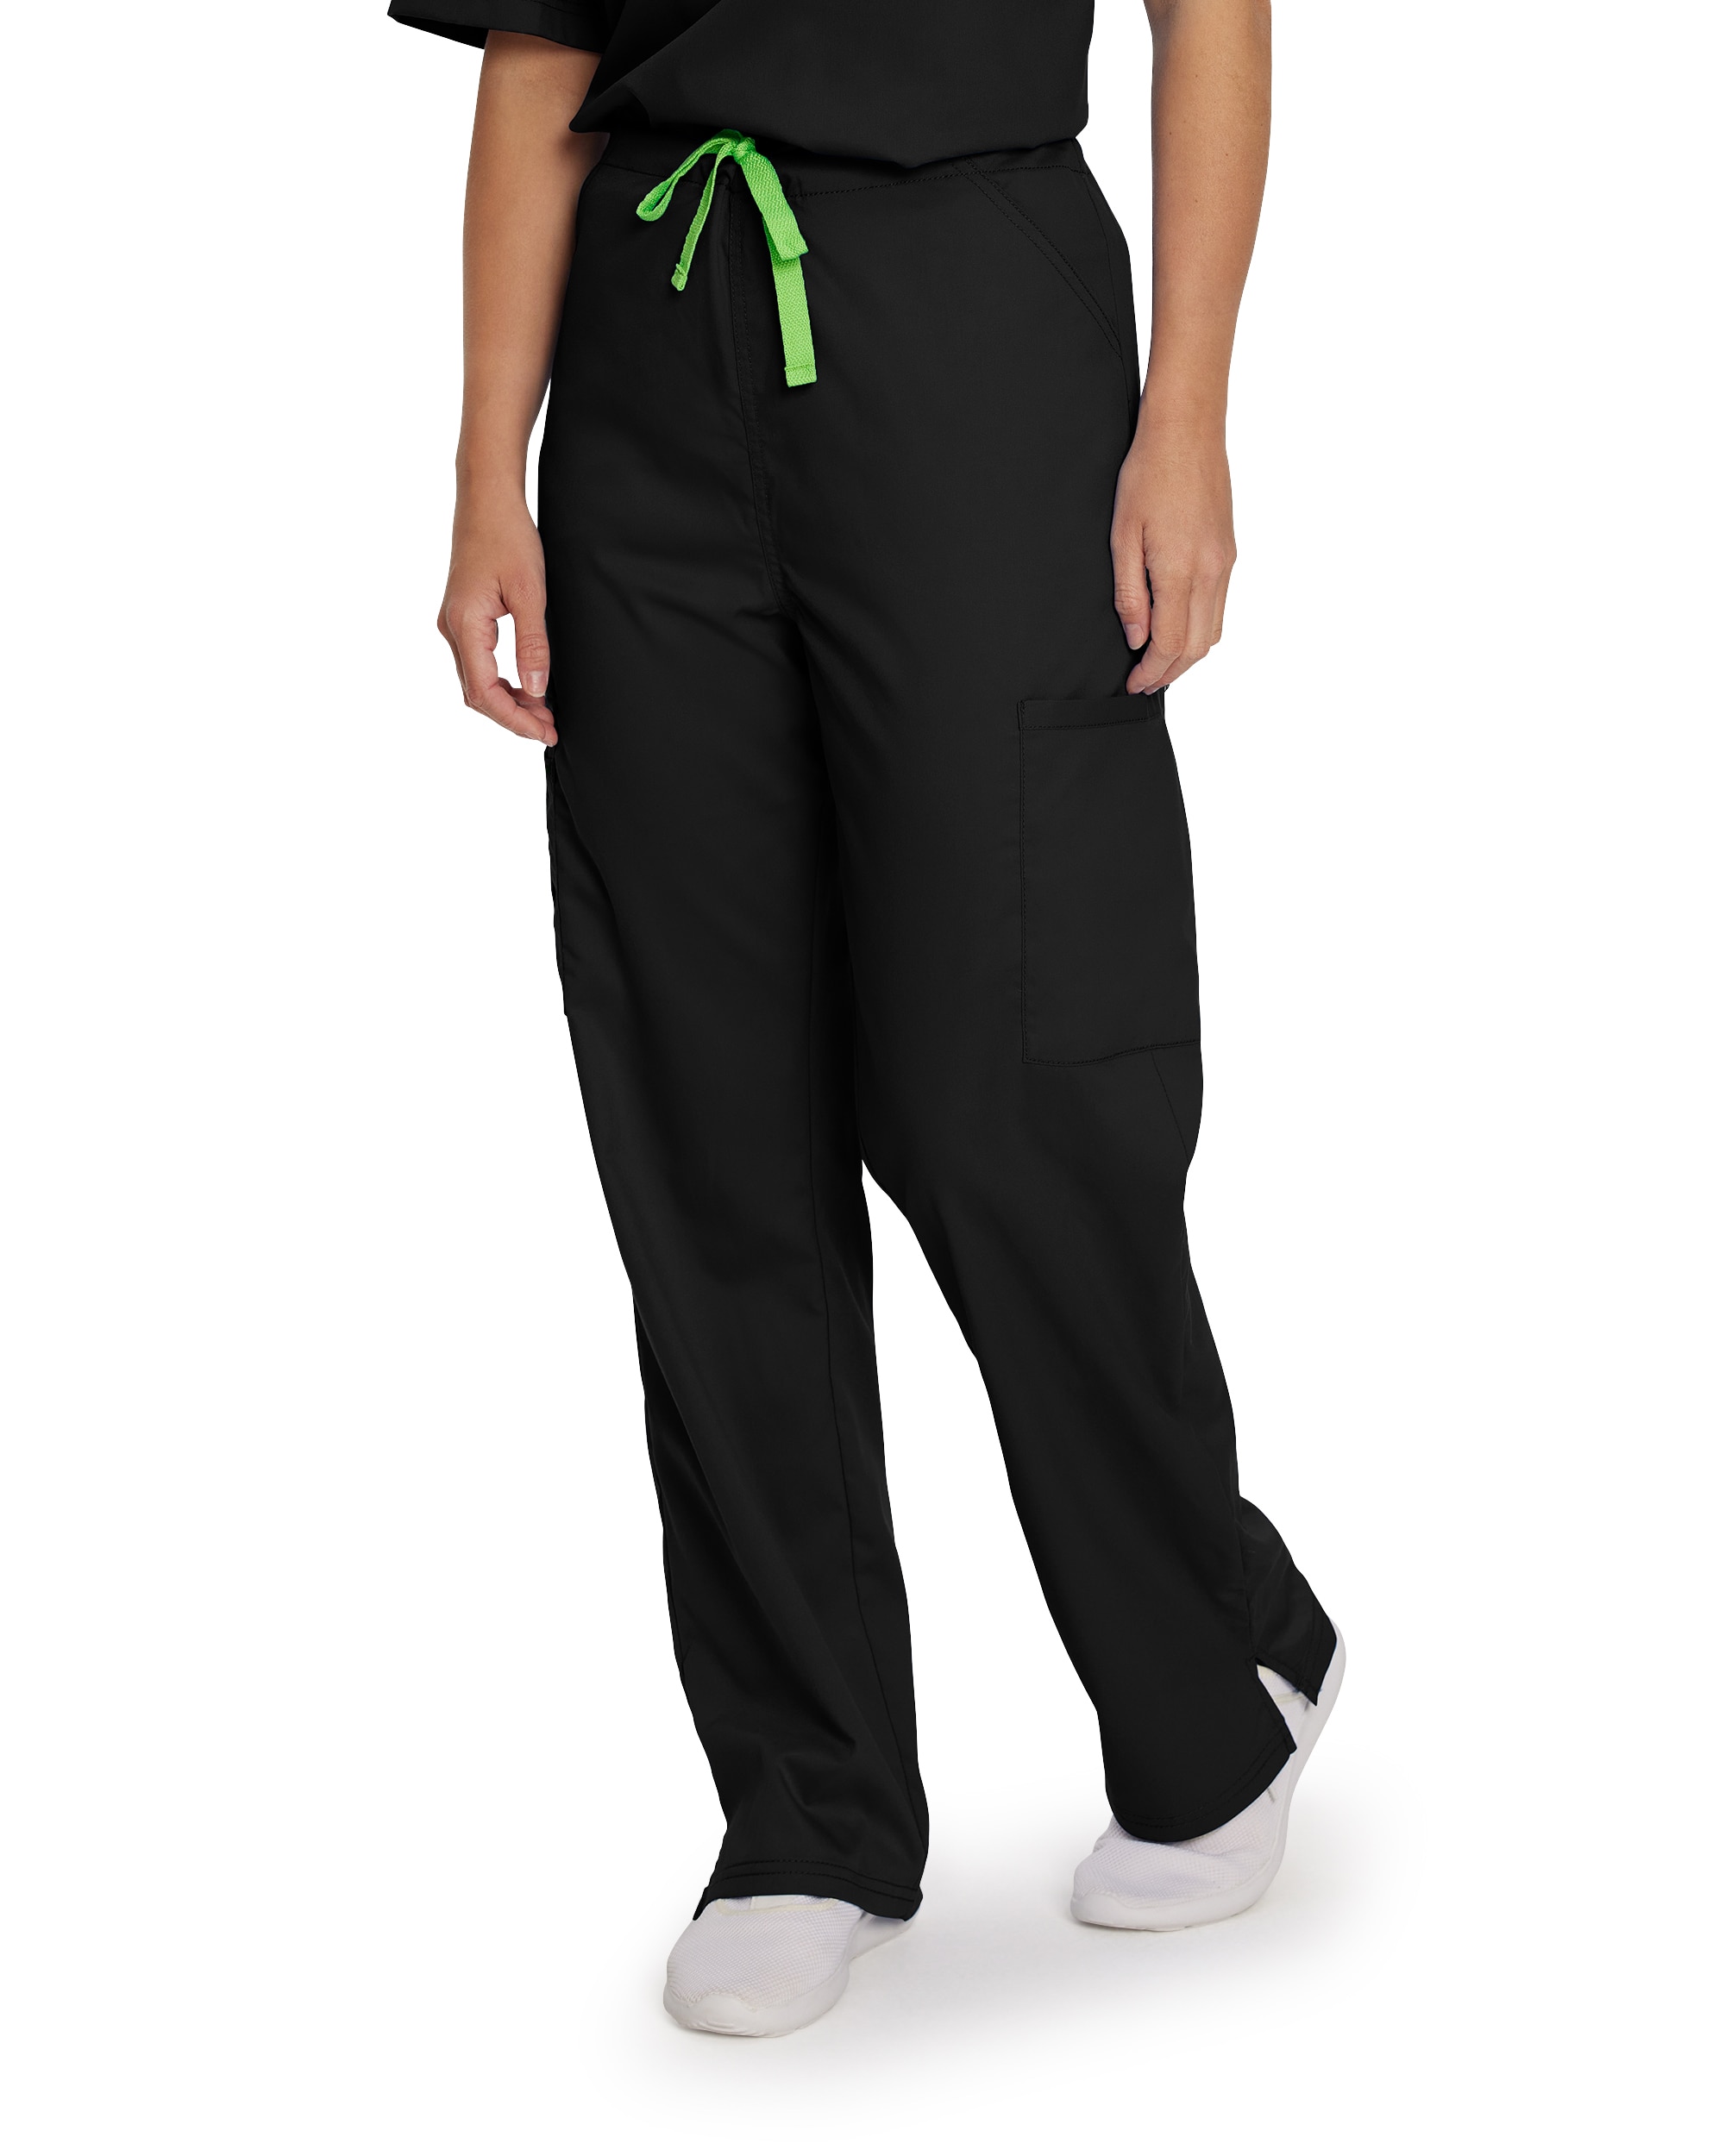 Unisex Pant with Cargo Pockets - Tall Length (2104)